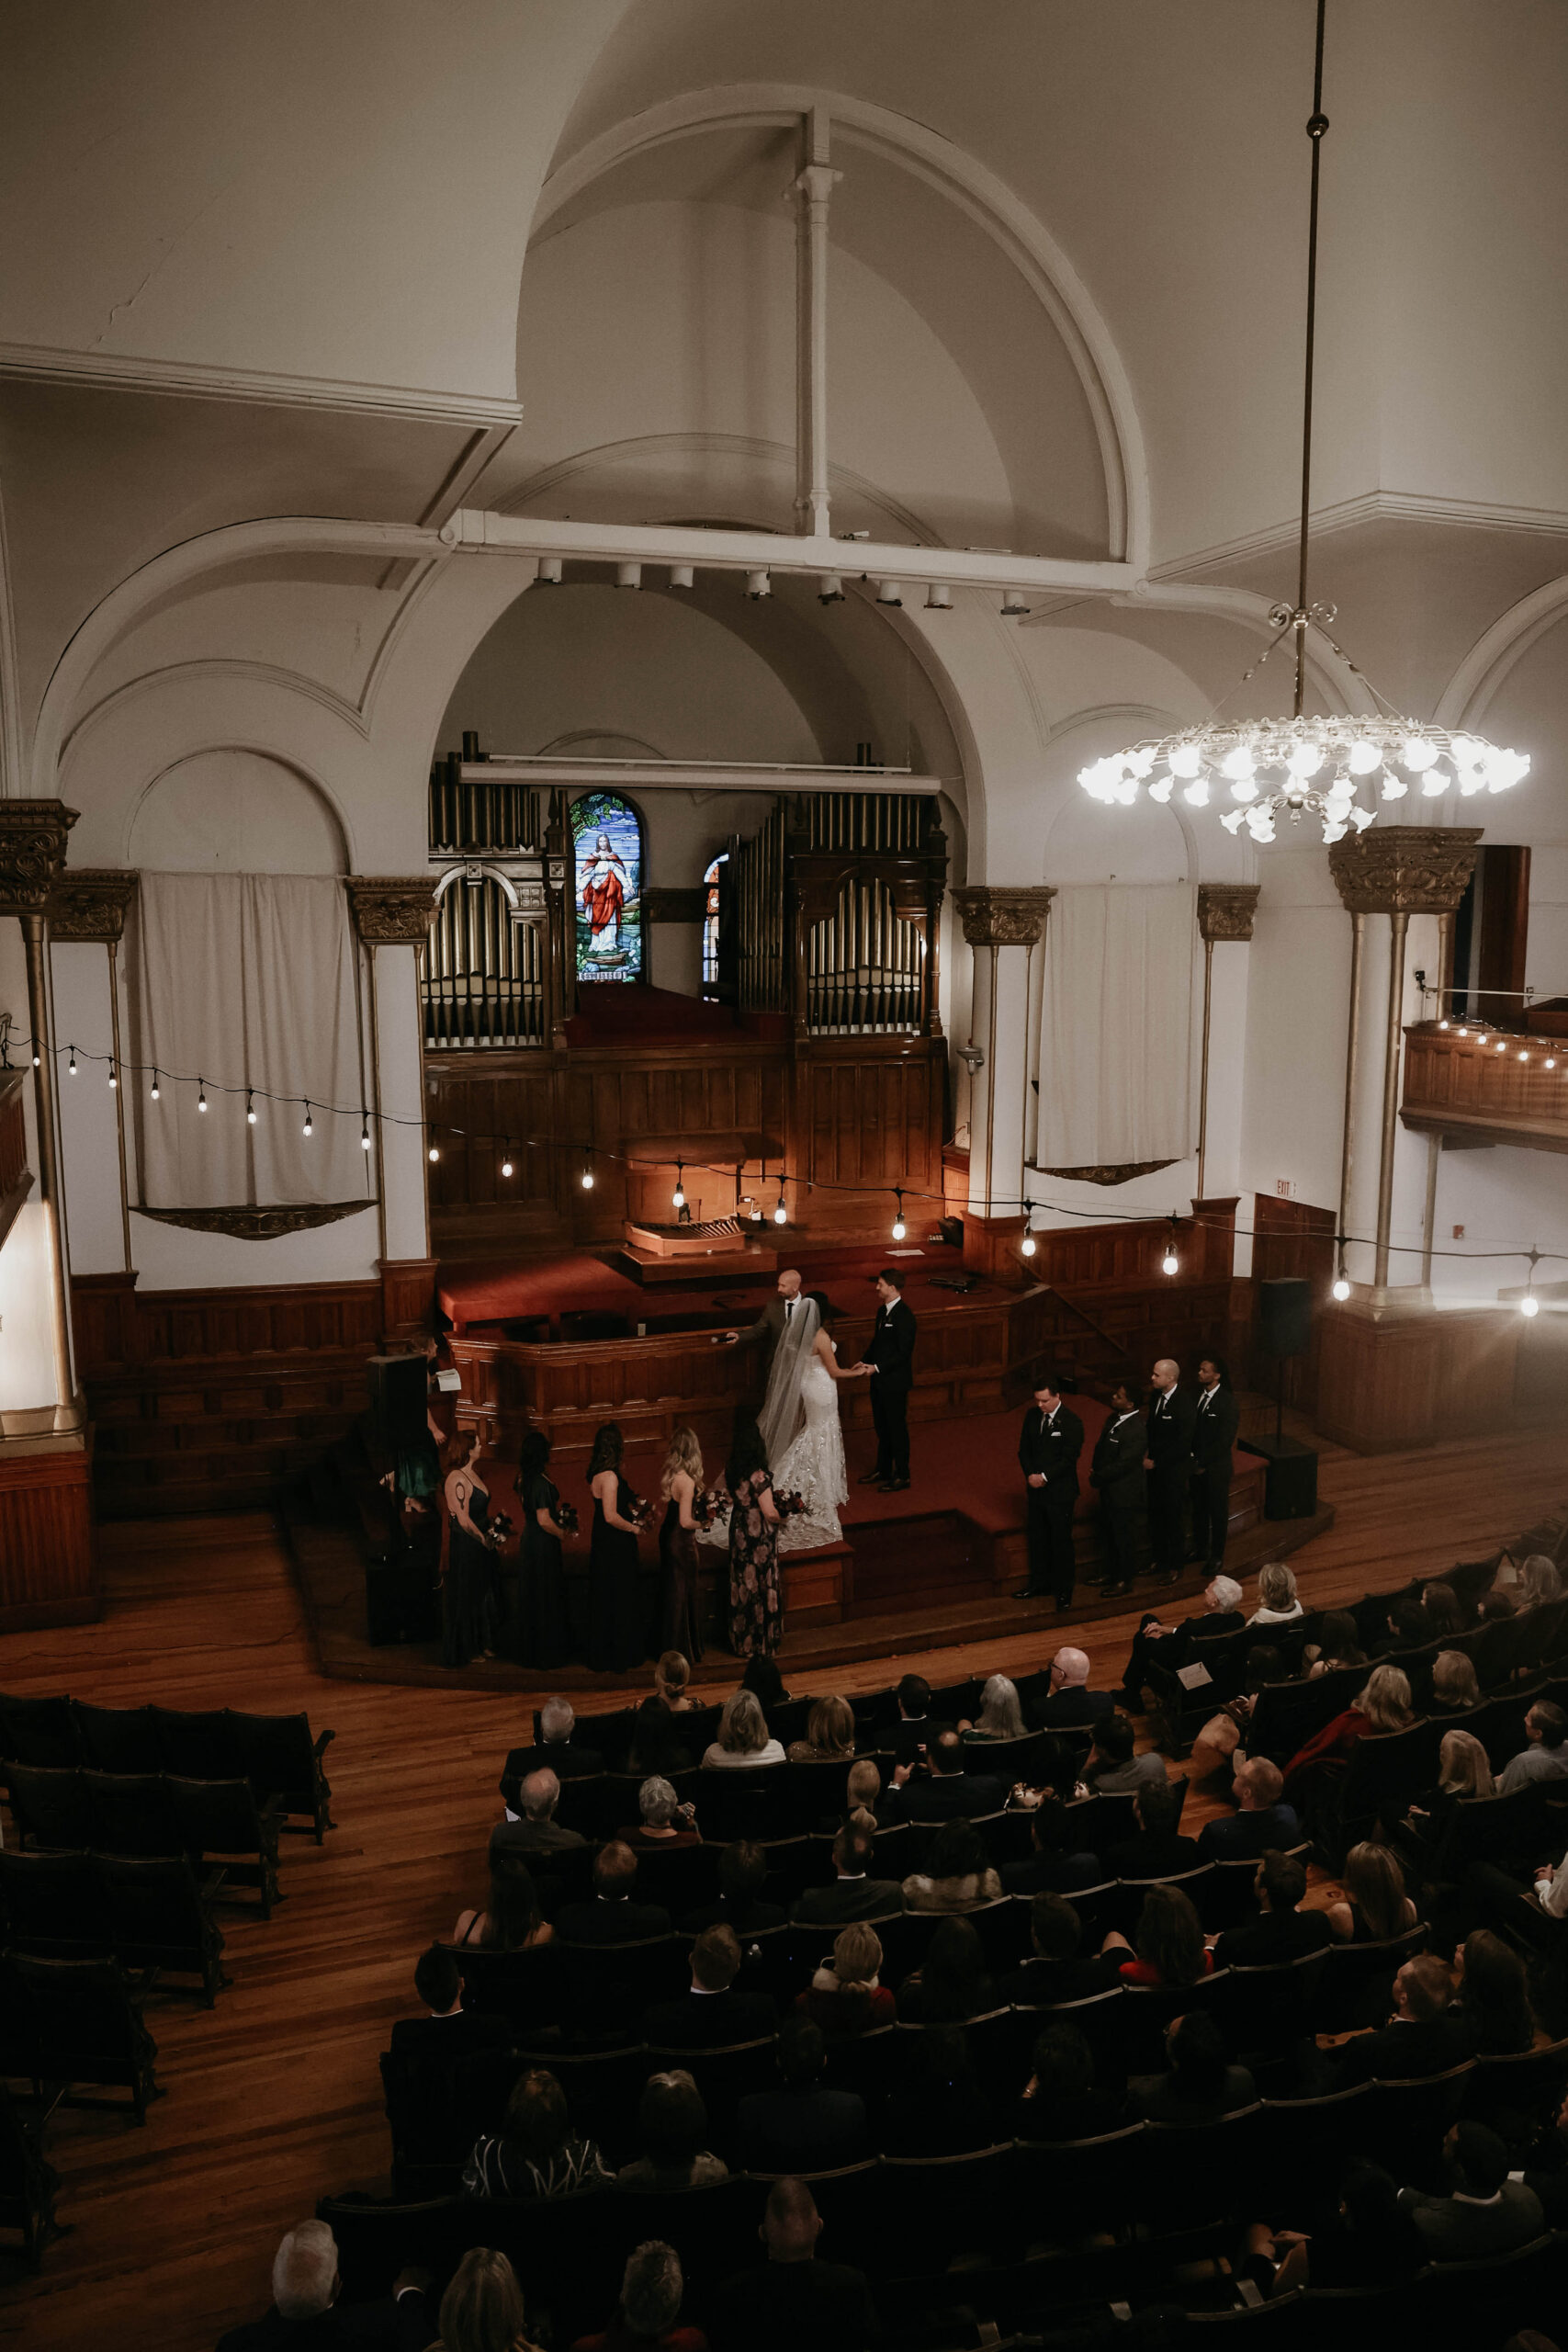 long shot of the whole church ceremony scene